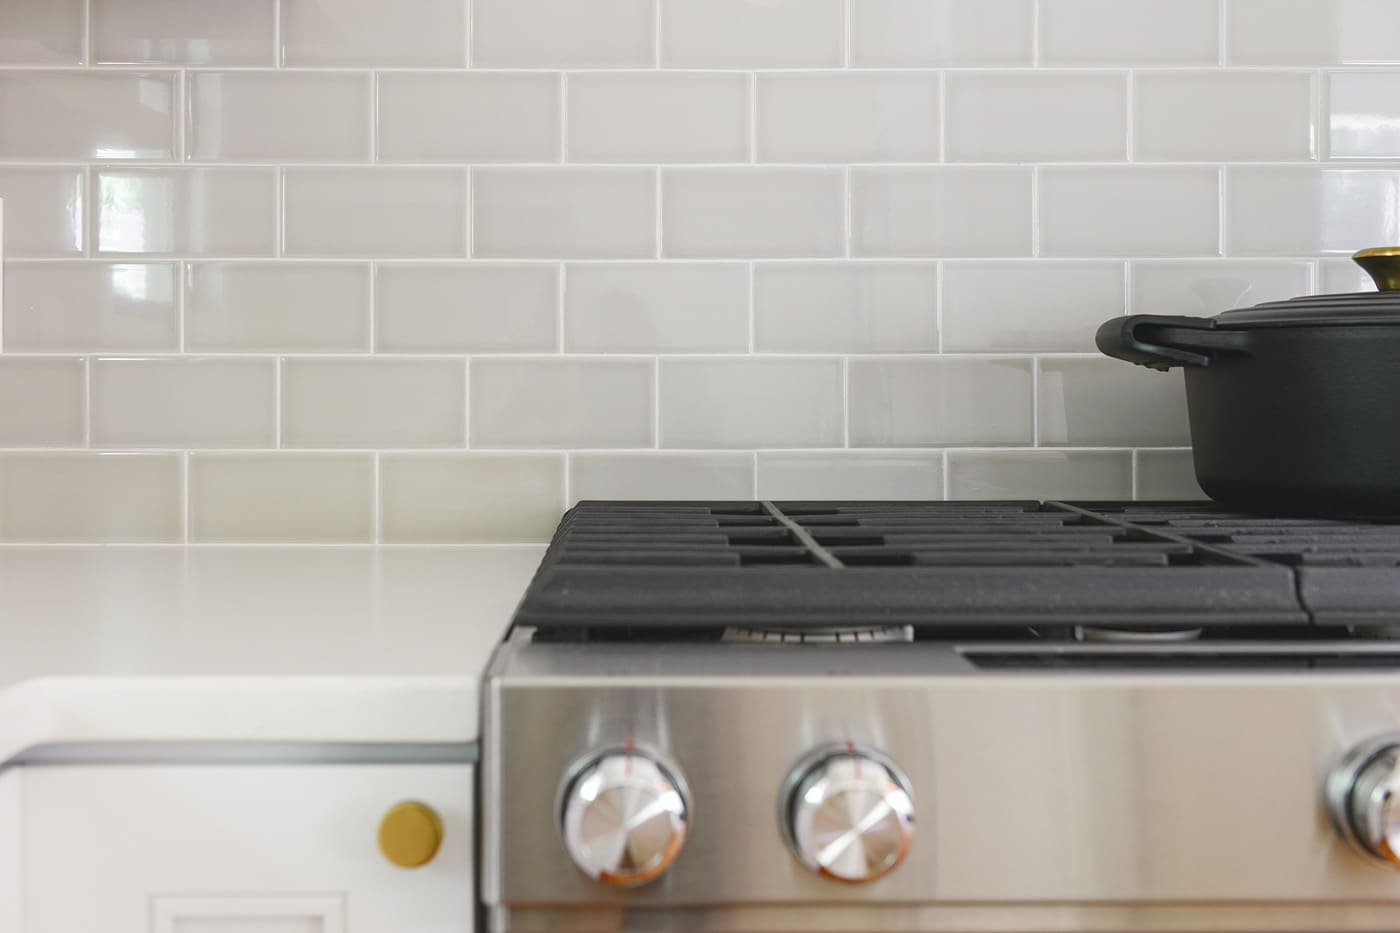 How-to tile a kitchen backsplash. We promise you can do it yourself! Plus, we're sharing a video tutorial where we walk you through the process from start to finish. // via Yellow Brick Home